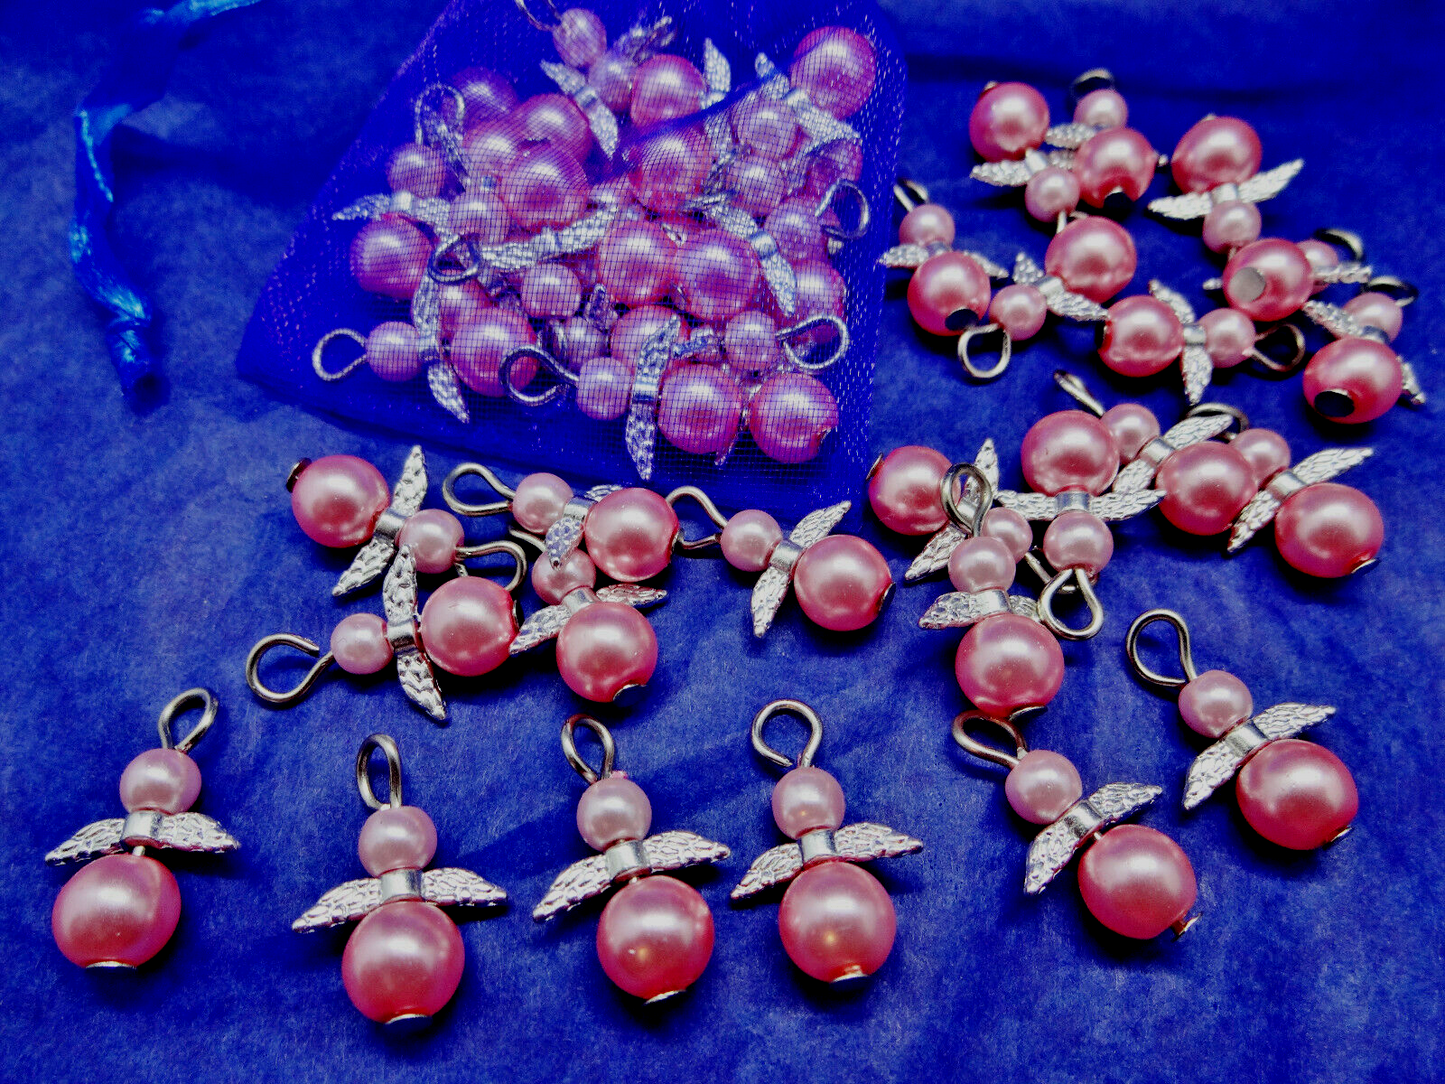 Hot pink pearl angel charms (24pcs, plain, on clasps or lanyards)